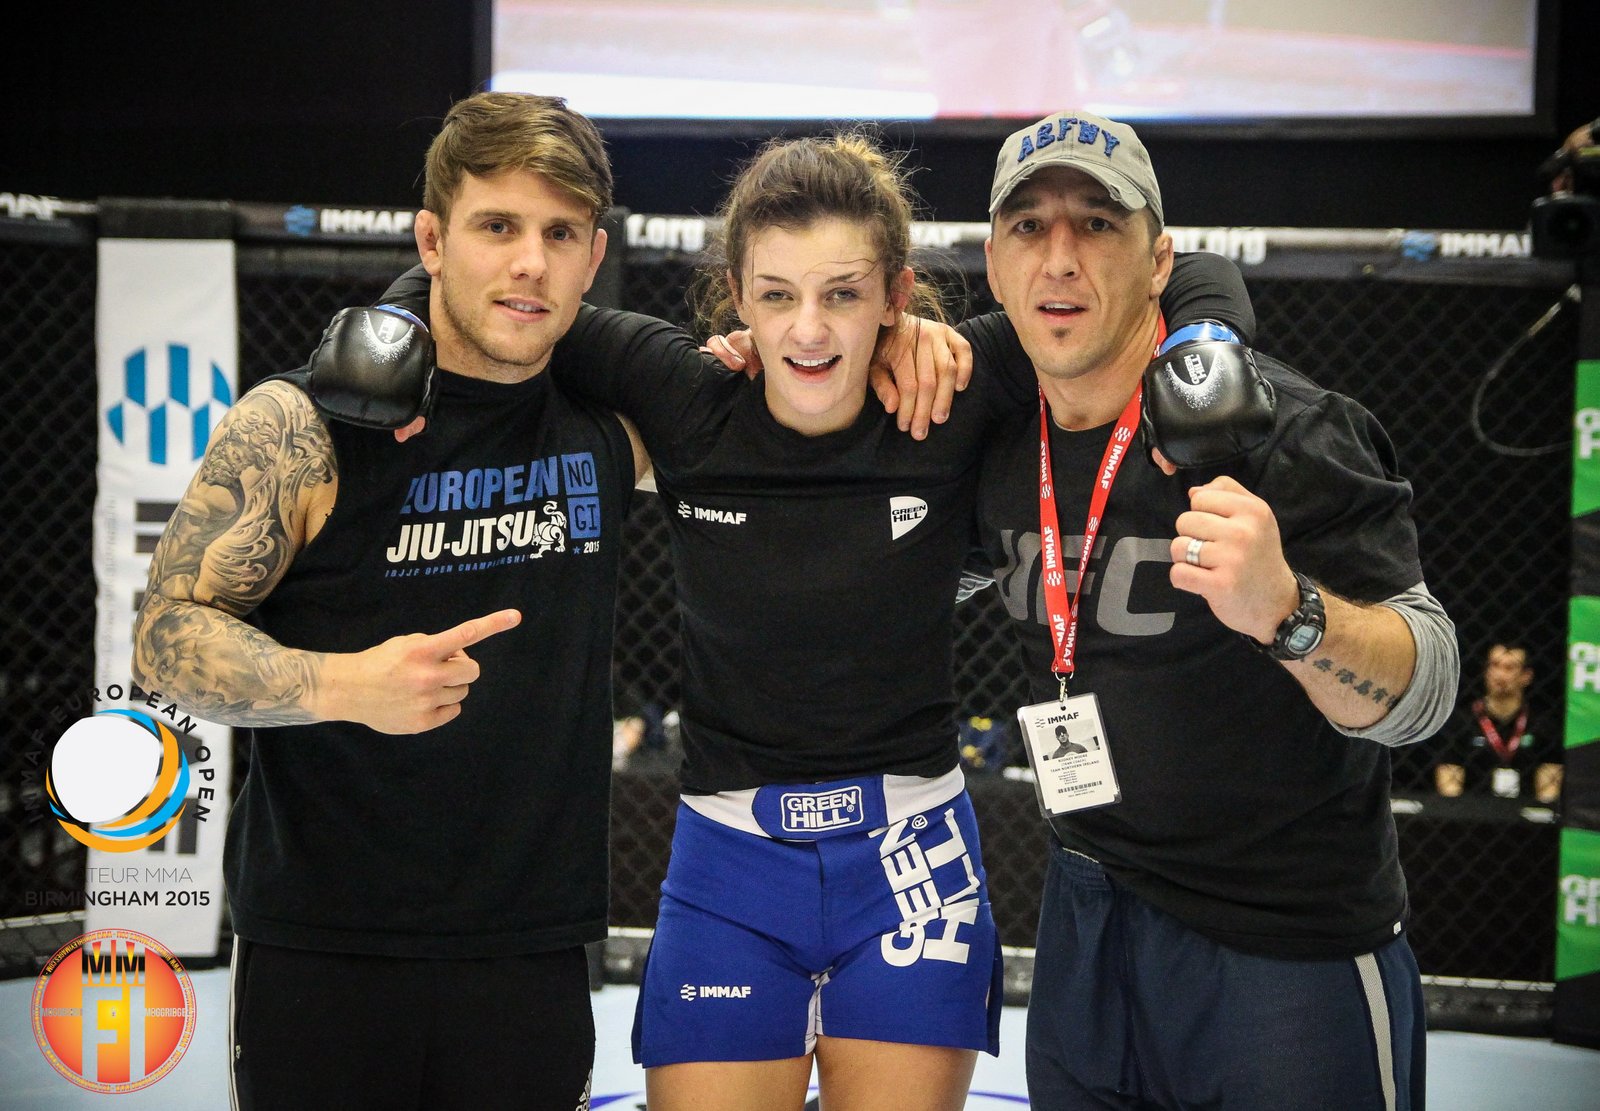 Leah McCourt: IMMAF Championships are the biggest challenge for an amateur